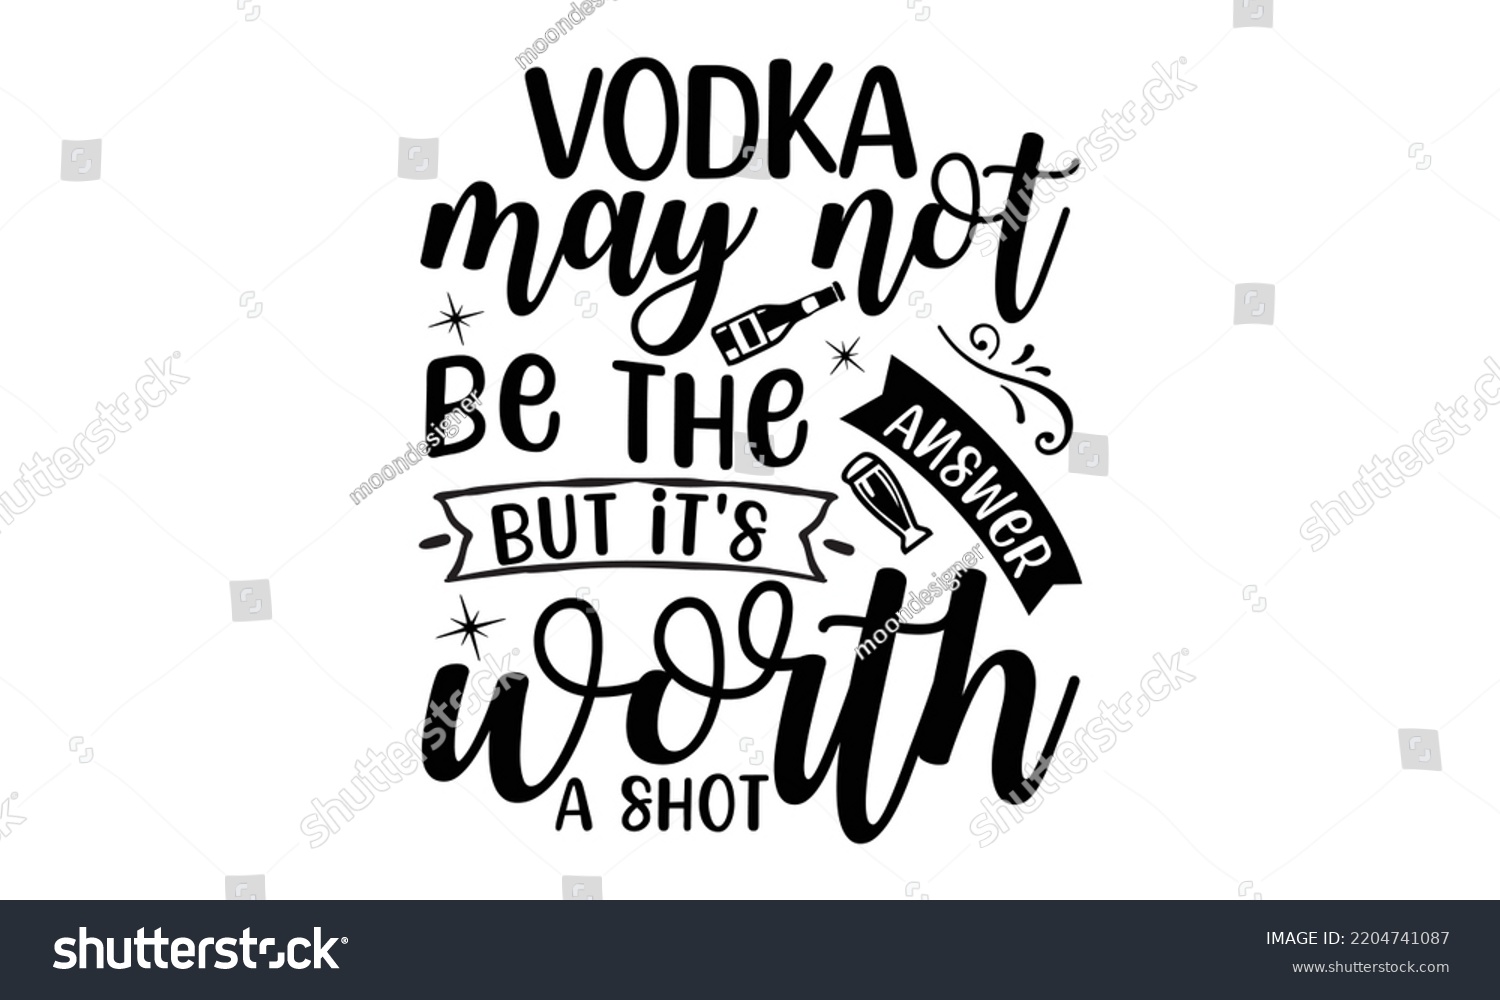 SVG of  vodka may not be the answer but it's worth a shot- Alcohol svg t shirt design, Girl Beer Design, Prost, Pretzels and Beer, Calligraphy graphic design, SVG Files for Cutting Cricut and Silhouette, EPS svg